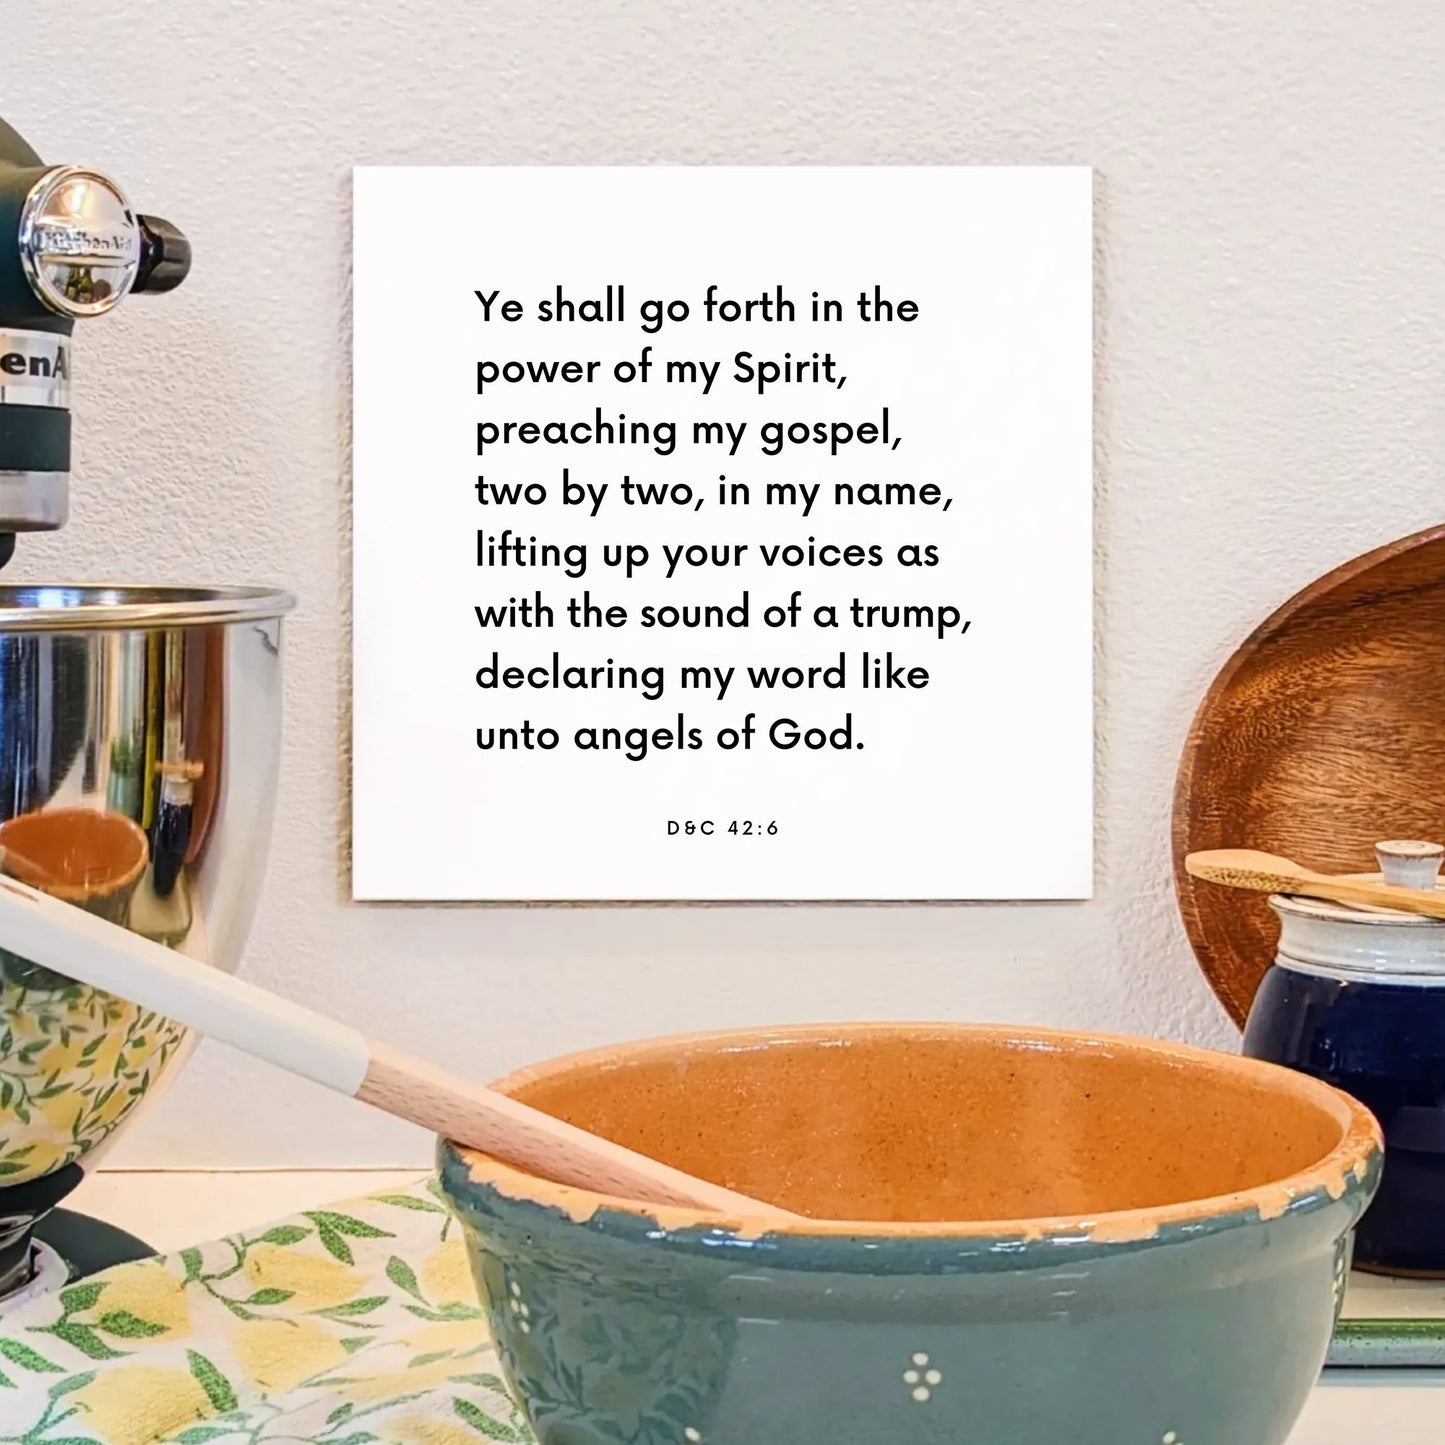 Kitchen mouting of the scripture tile for D&C 42:6 - "Ye shall go forth in the power of my Spirit"